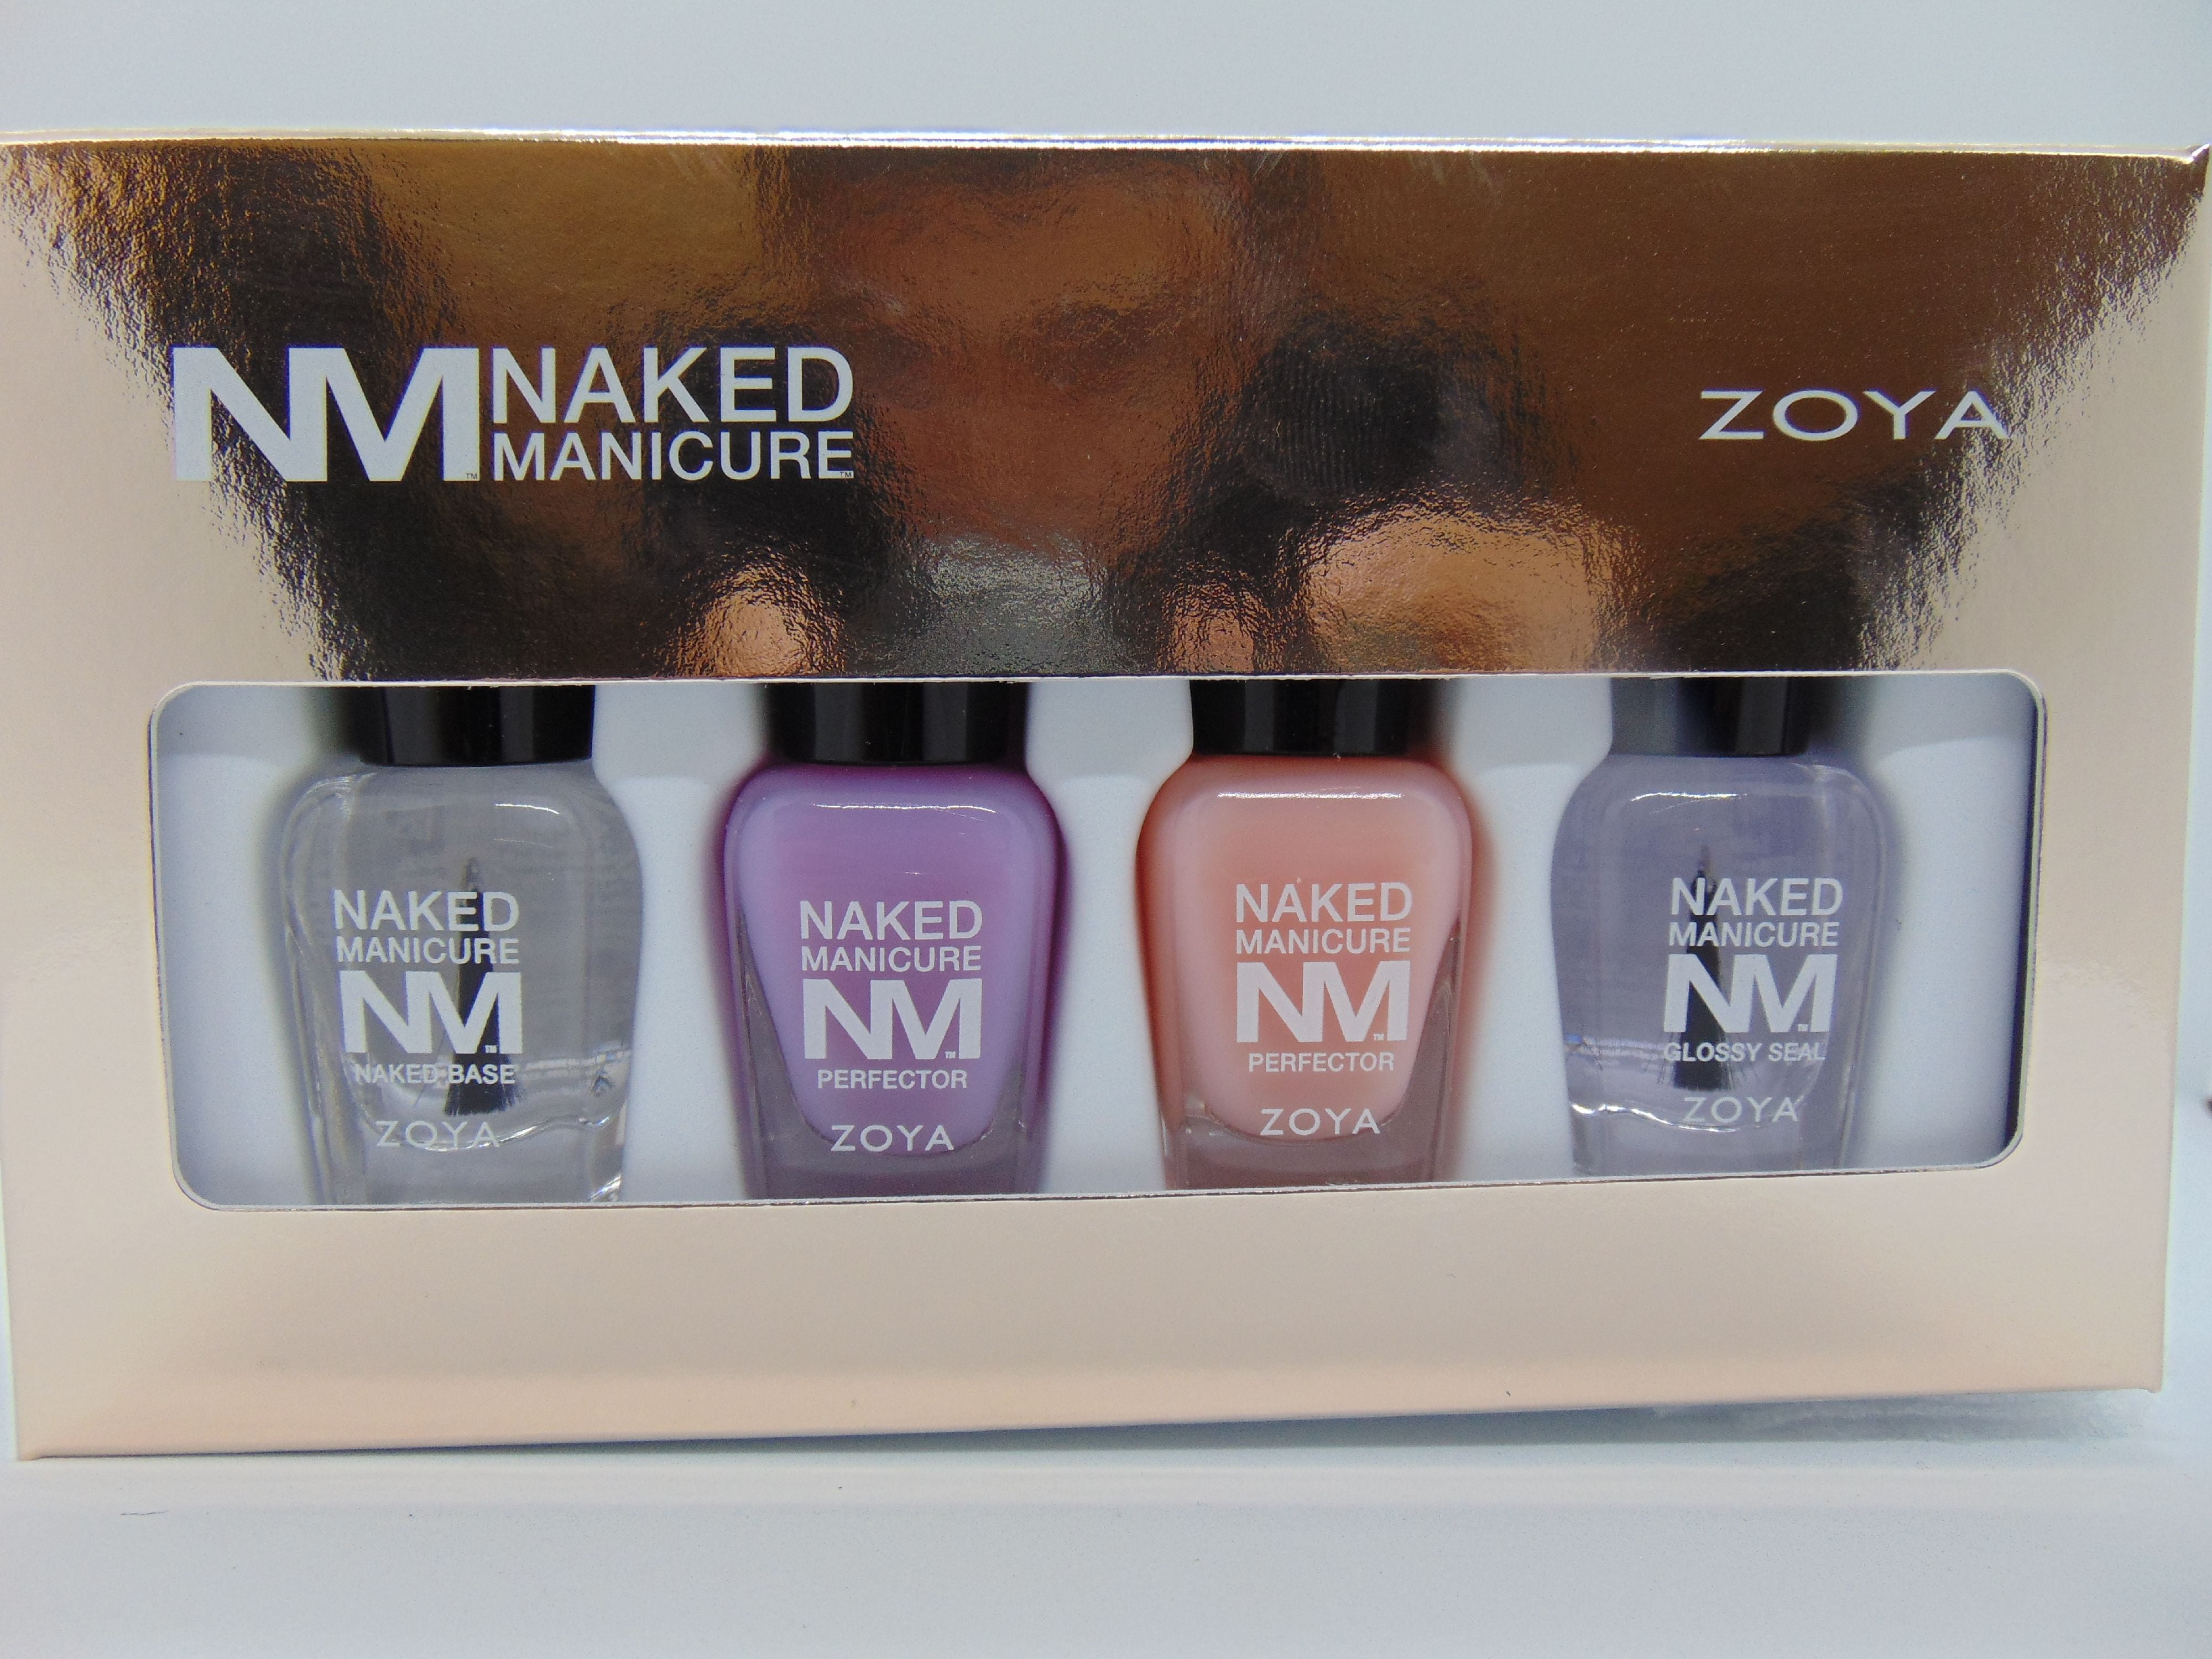 6. Zoya Nail Polish, Naked Manicure Perfector in Pink - wide 7